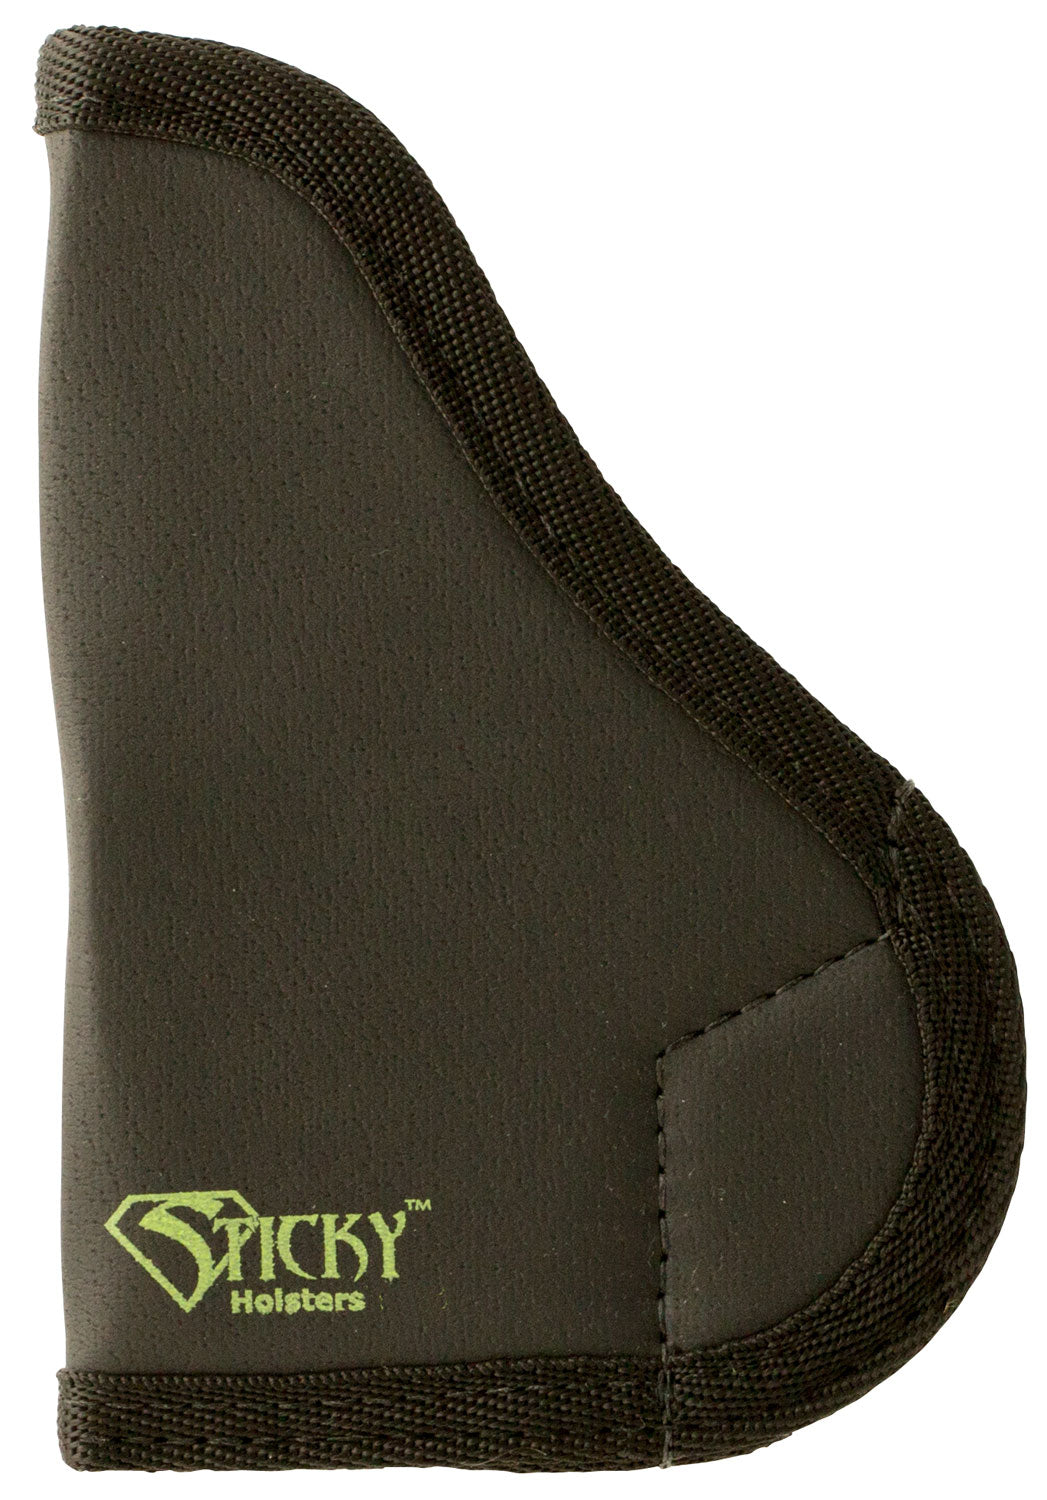 Sticky Holsters MD4GEN1 MD-4 Glock 26/27 Latex Free Synthetic Rubber Black w/Green Logo